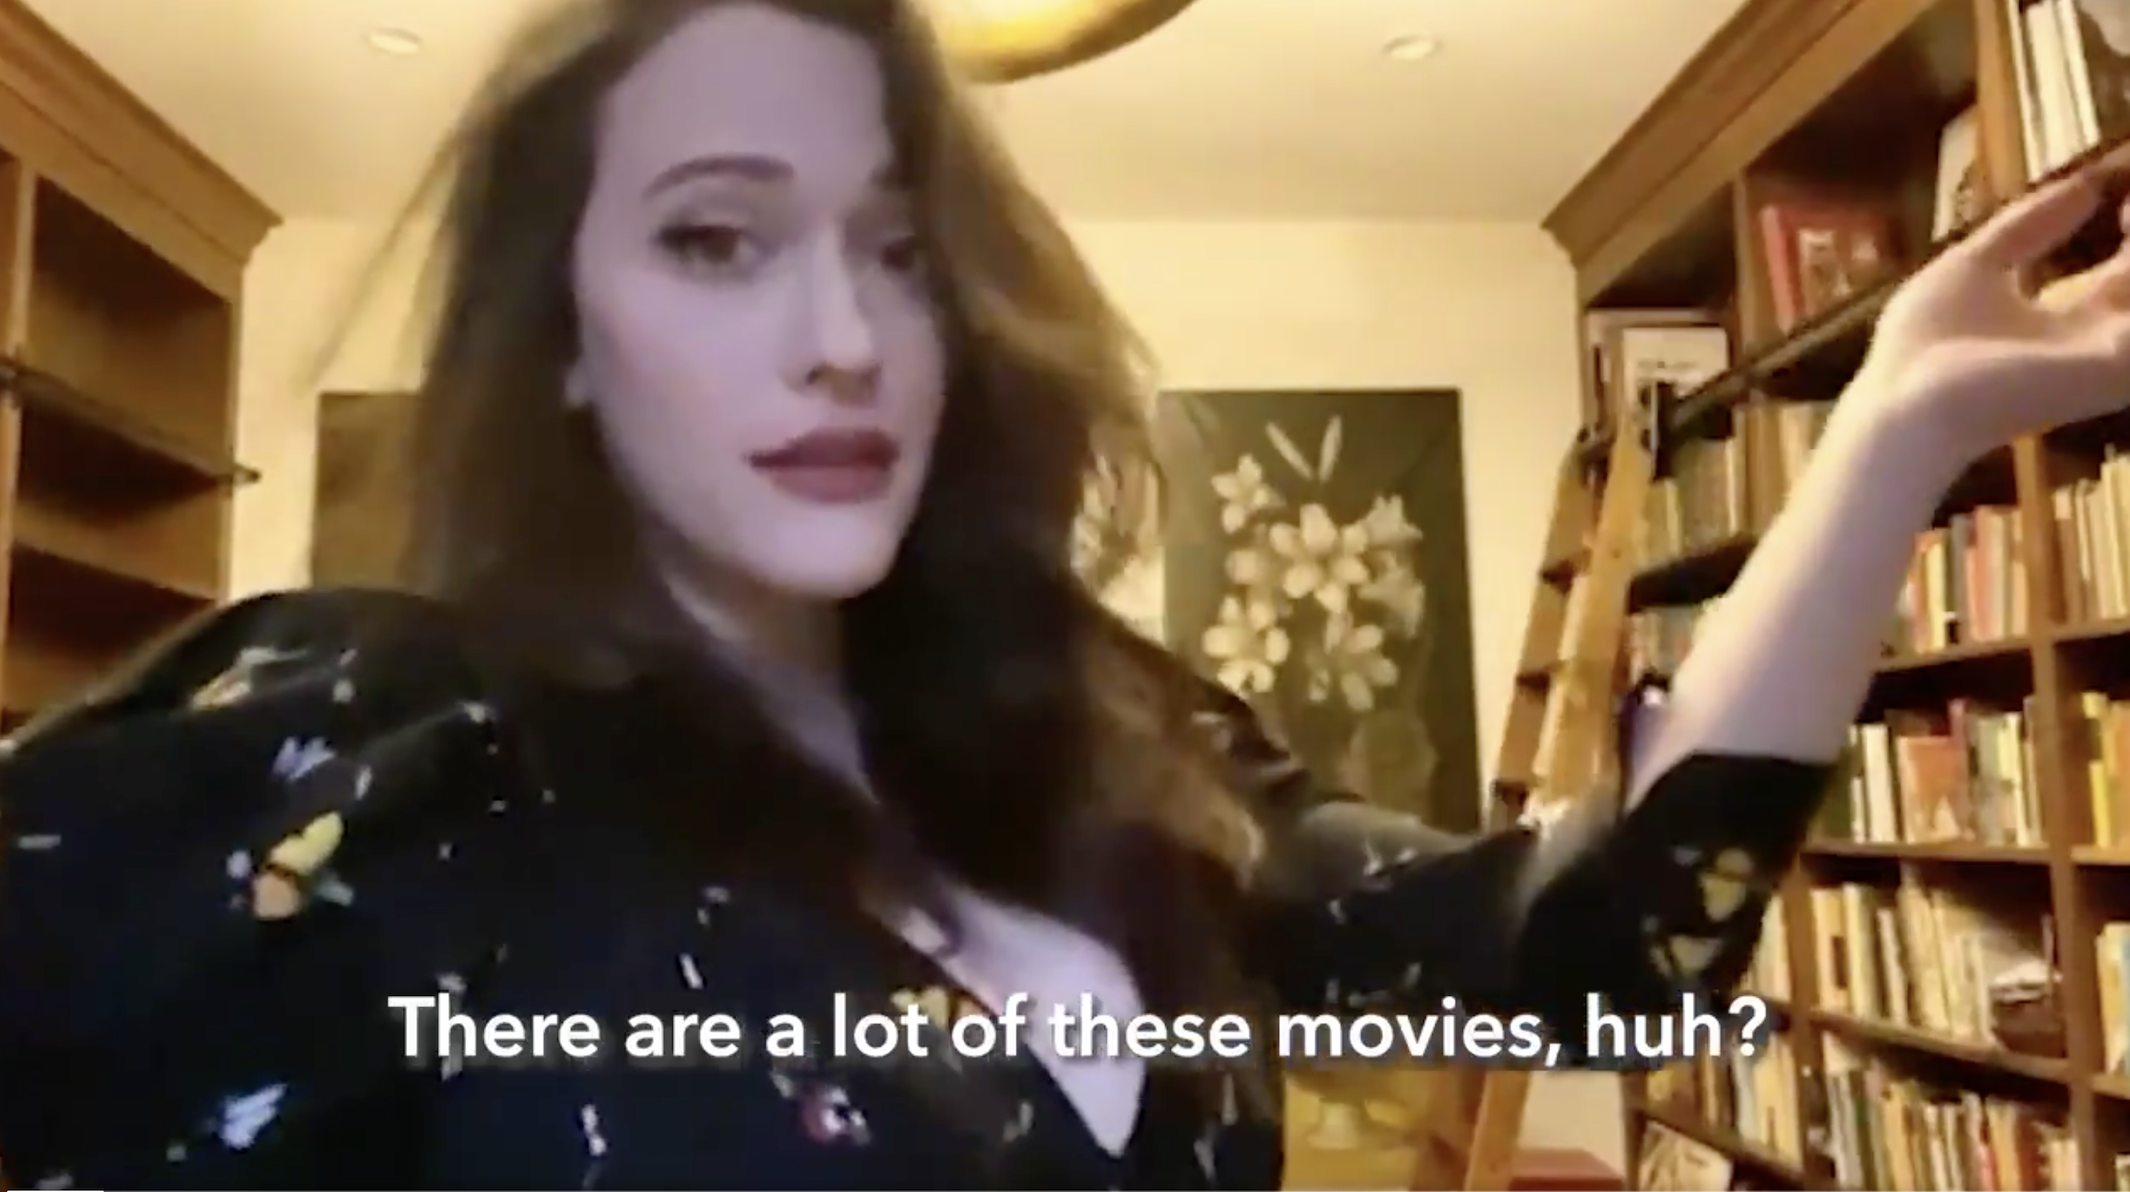 Kat Dennings saying there are a lot of these movies, huh?